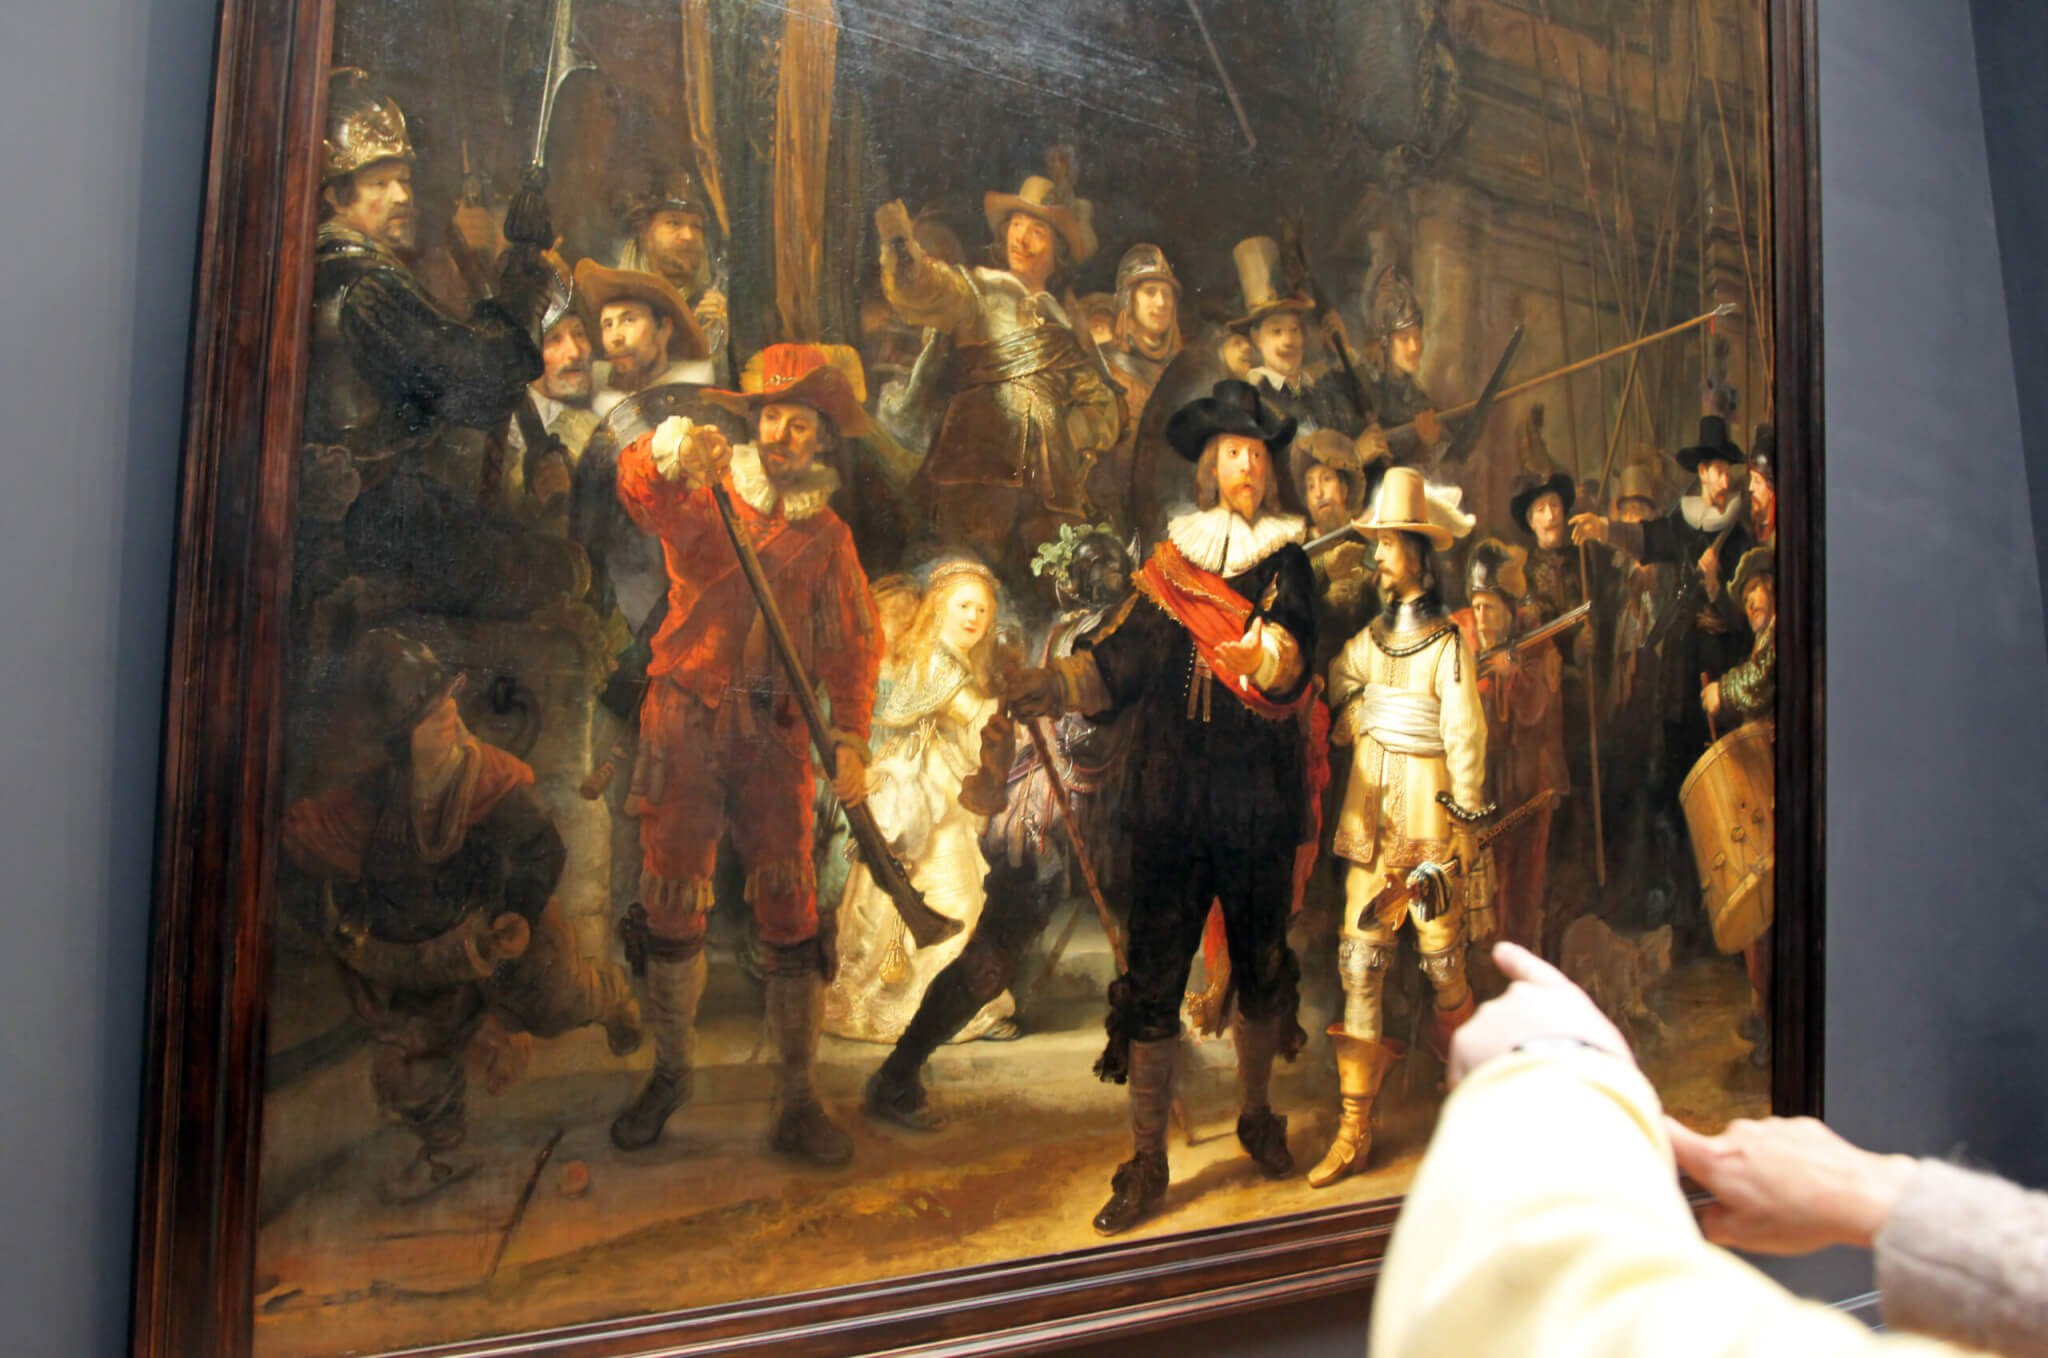 Spectators looking at Rembrandt's "The Night Watch" painting in Rijksmuseum in city Amsterdam. 